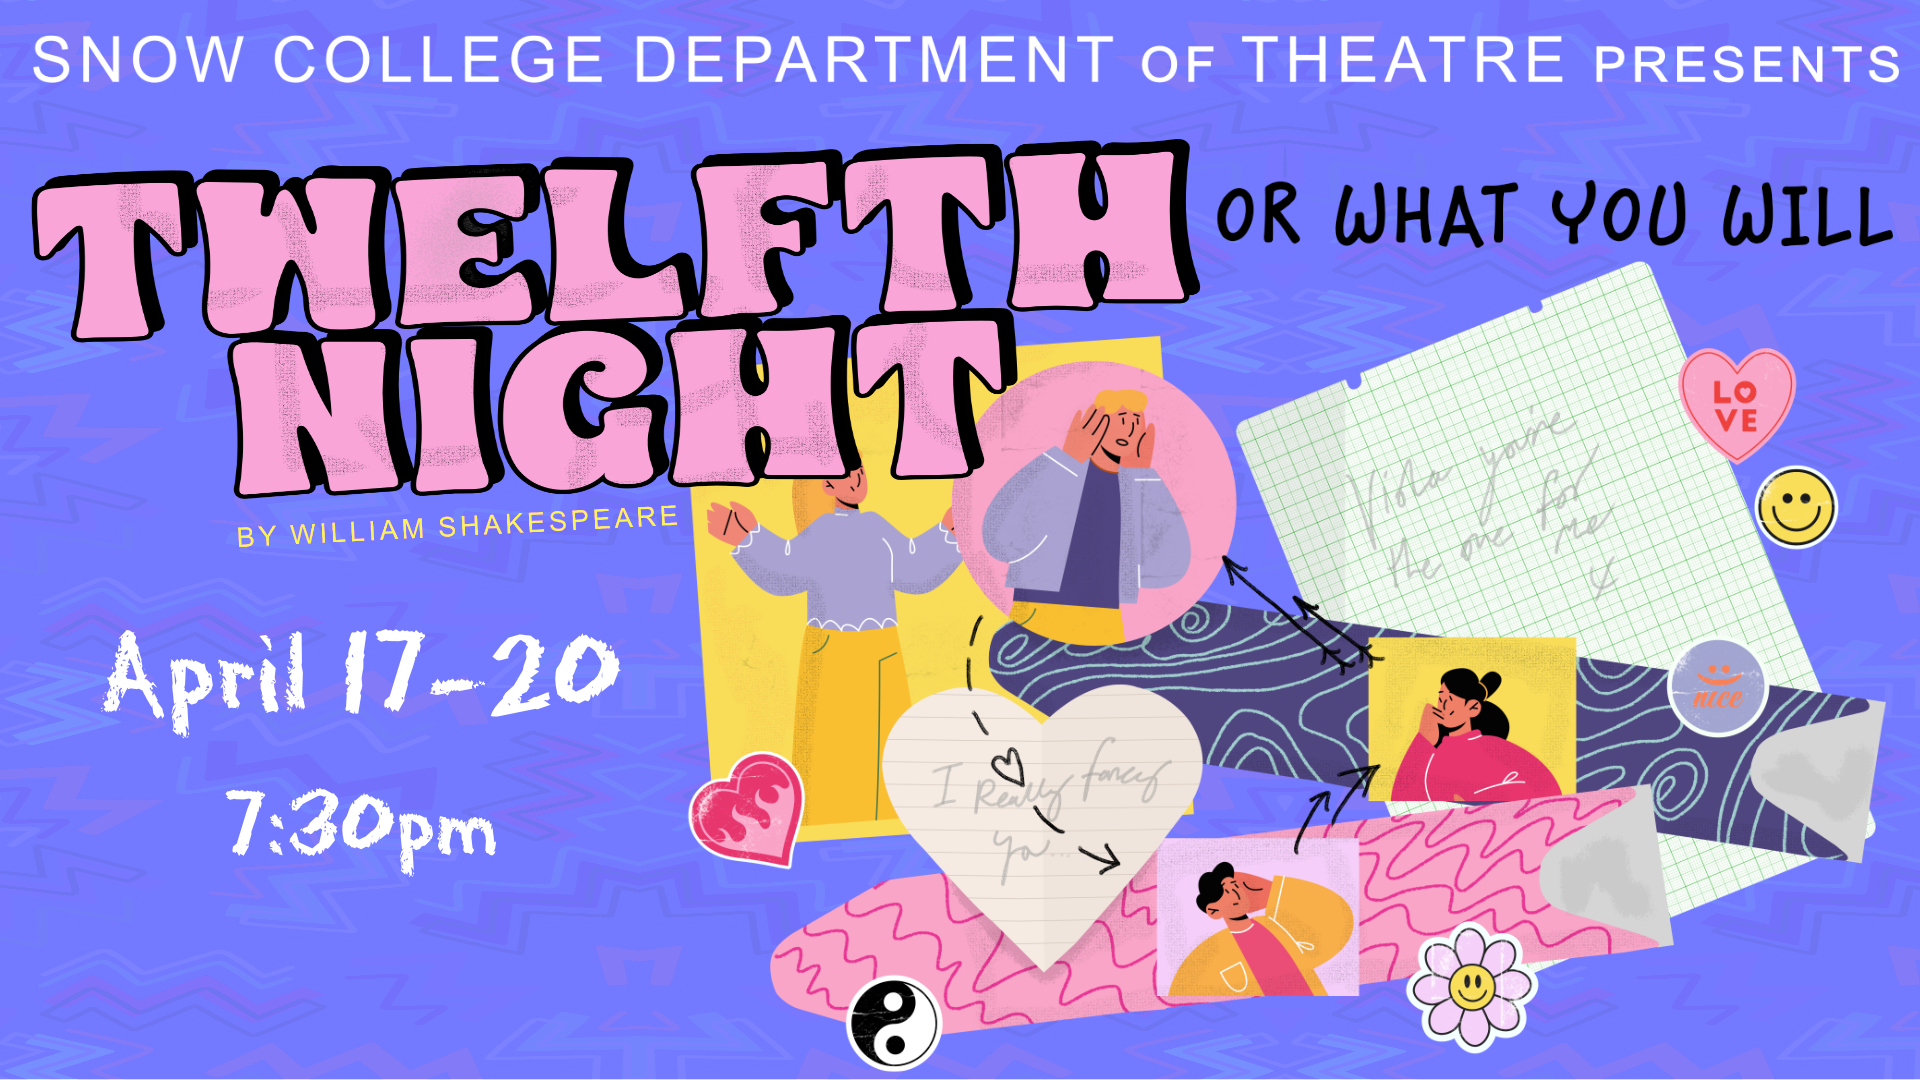 Snow College Department of Theatre Presents Twelfth Night or What You Will By William Shakespeare April 17-20 7:30pm